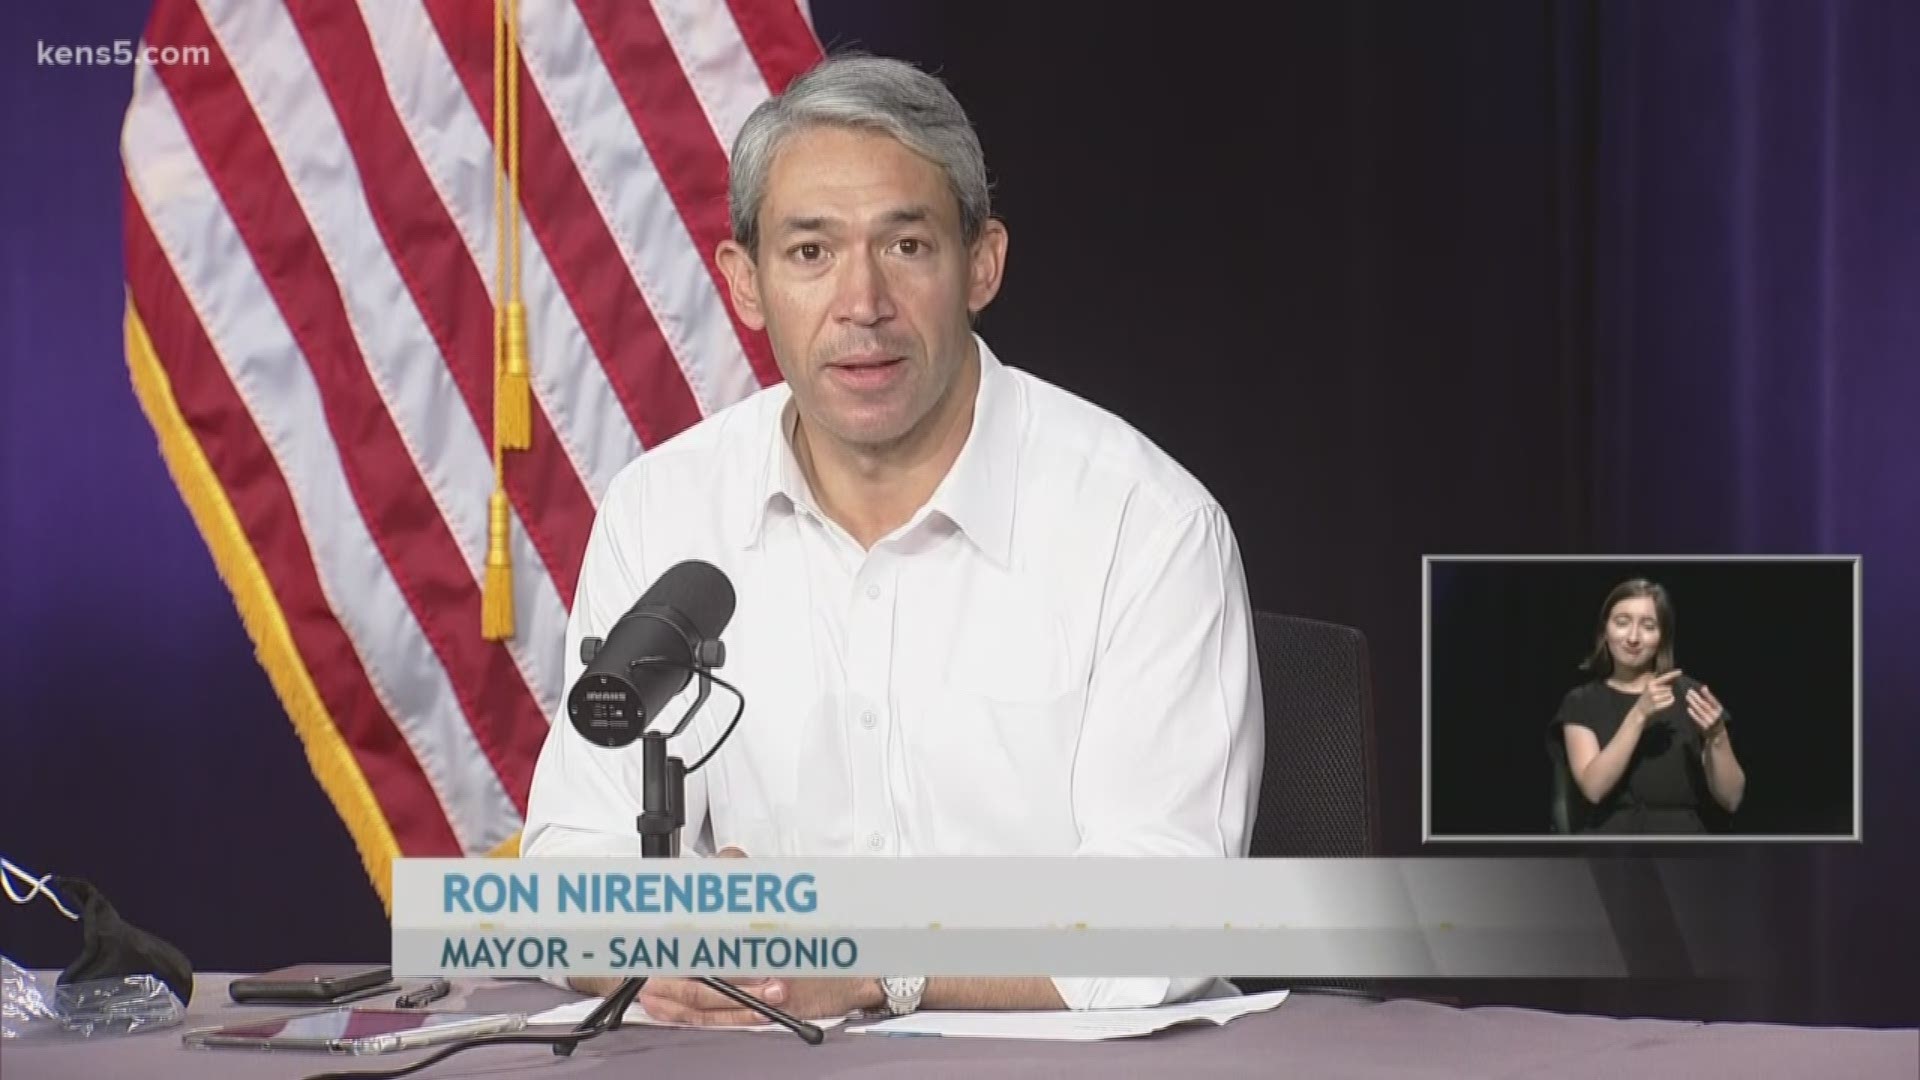 "You do not turn the ball over in the red zone," said  Mayor Nirenberg. Governor Abbott's order will allow more exceptions, but social distancing remains key.